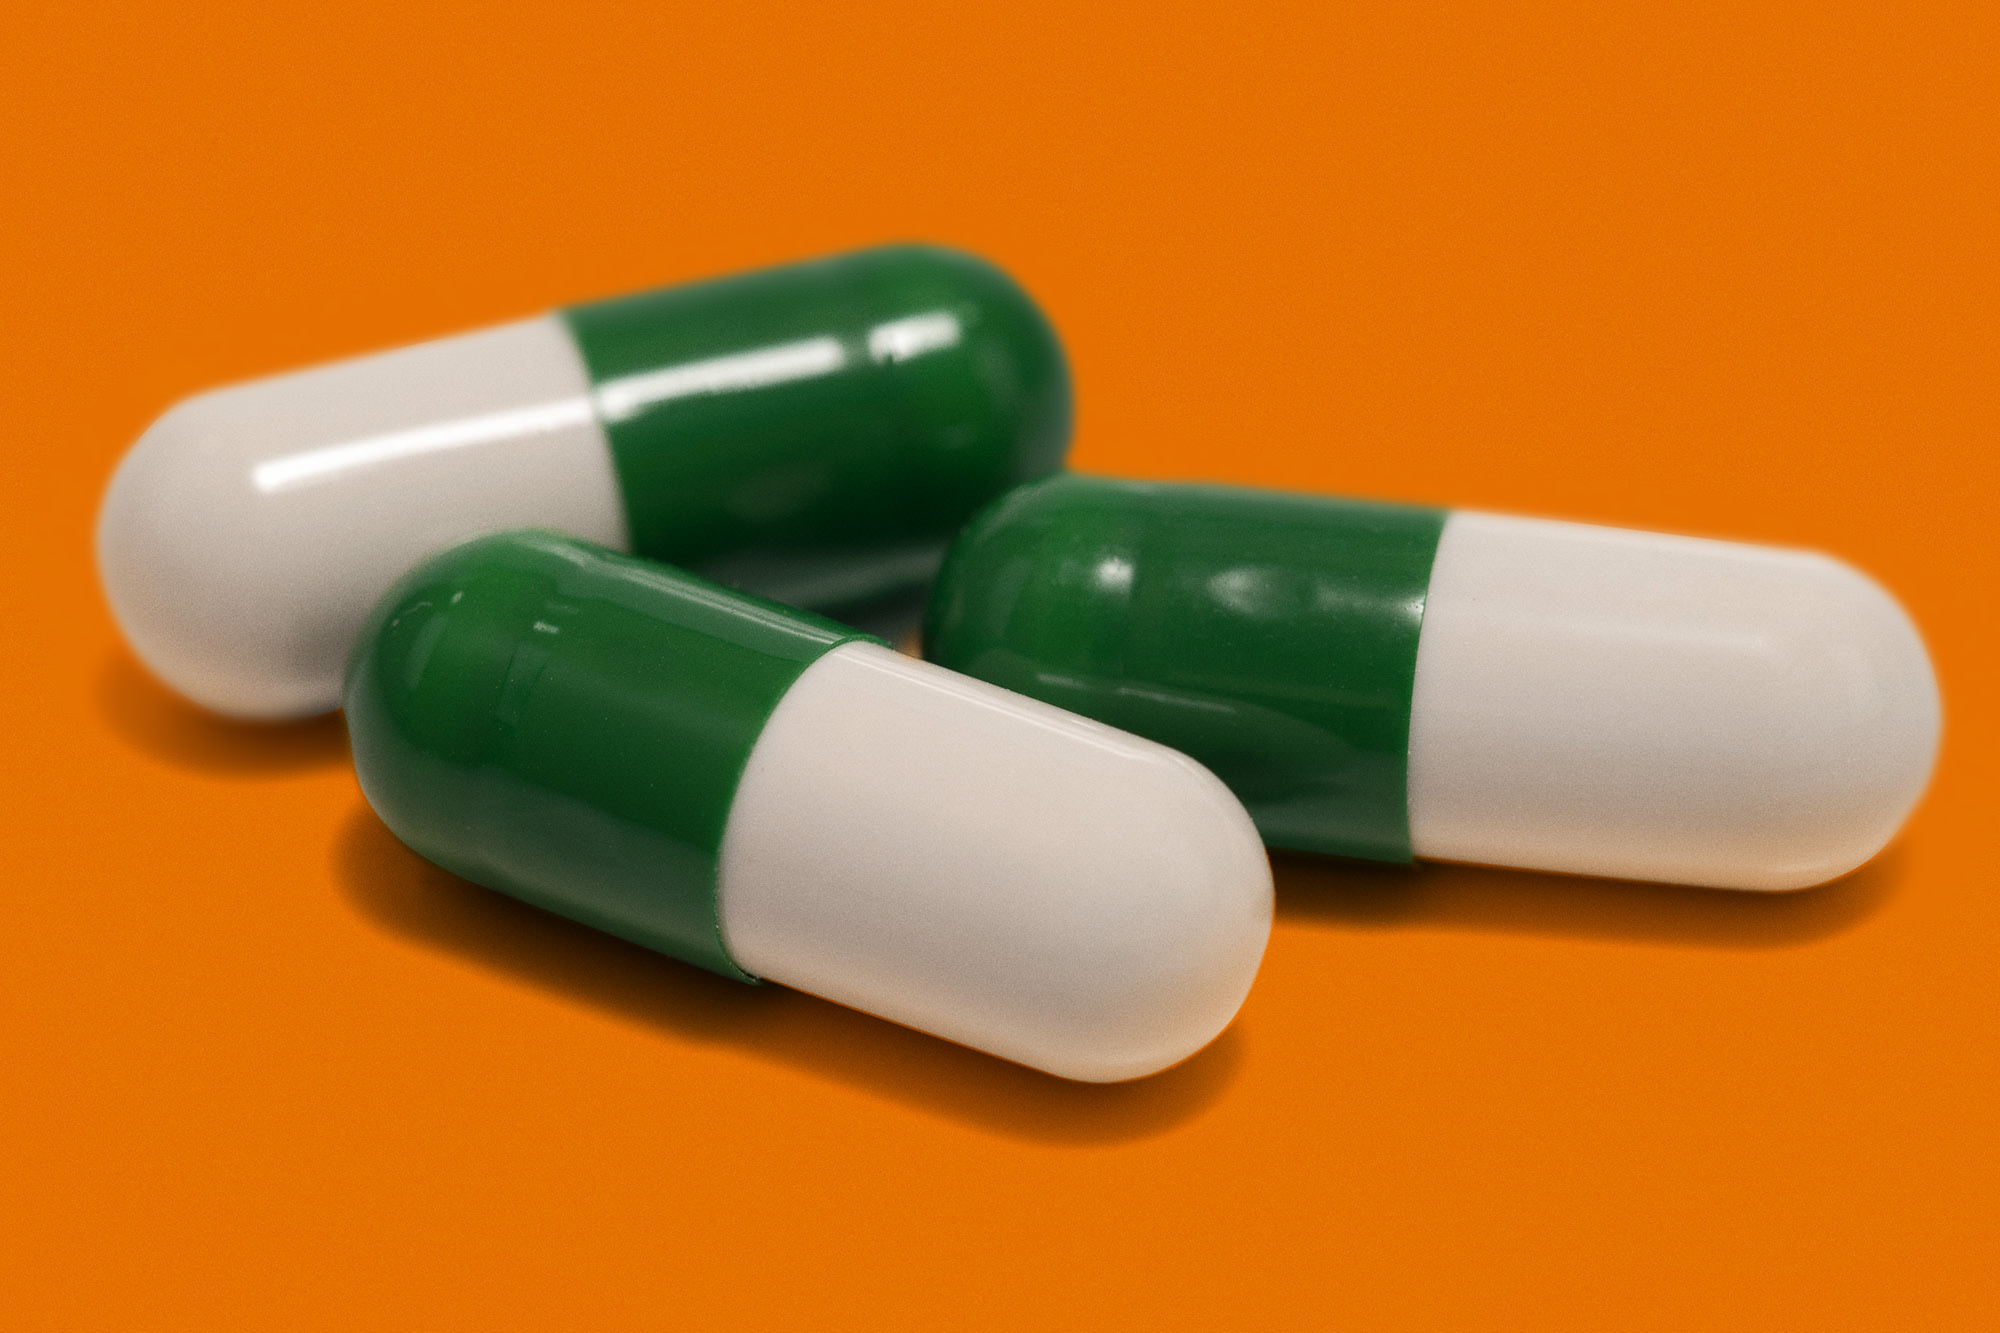 Prozac pill: oblong pill that is half green and half white